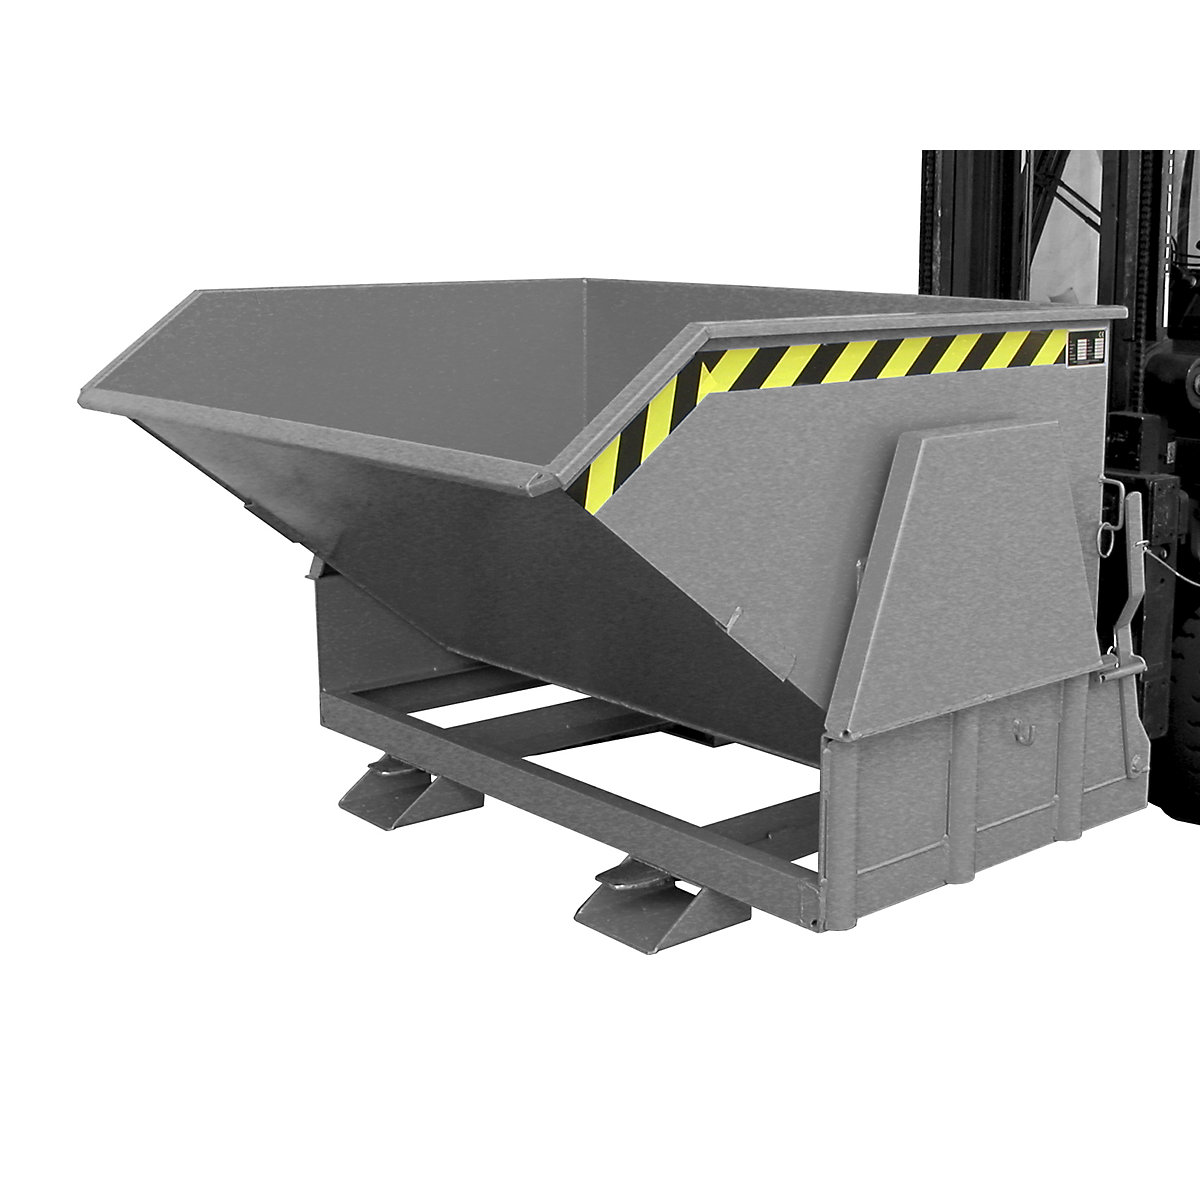 Tilting skip, standard overall height, without wheels – eurokraft pro, capacity 1.2 m³, painted grey RAL 7005-10